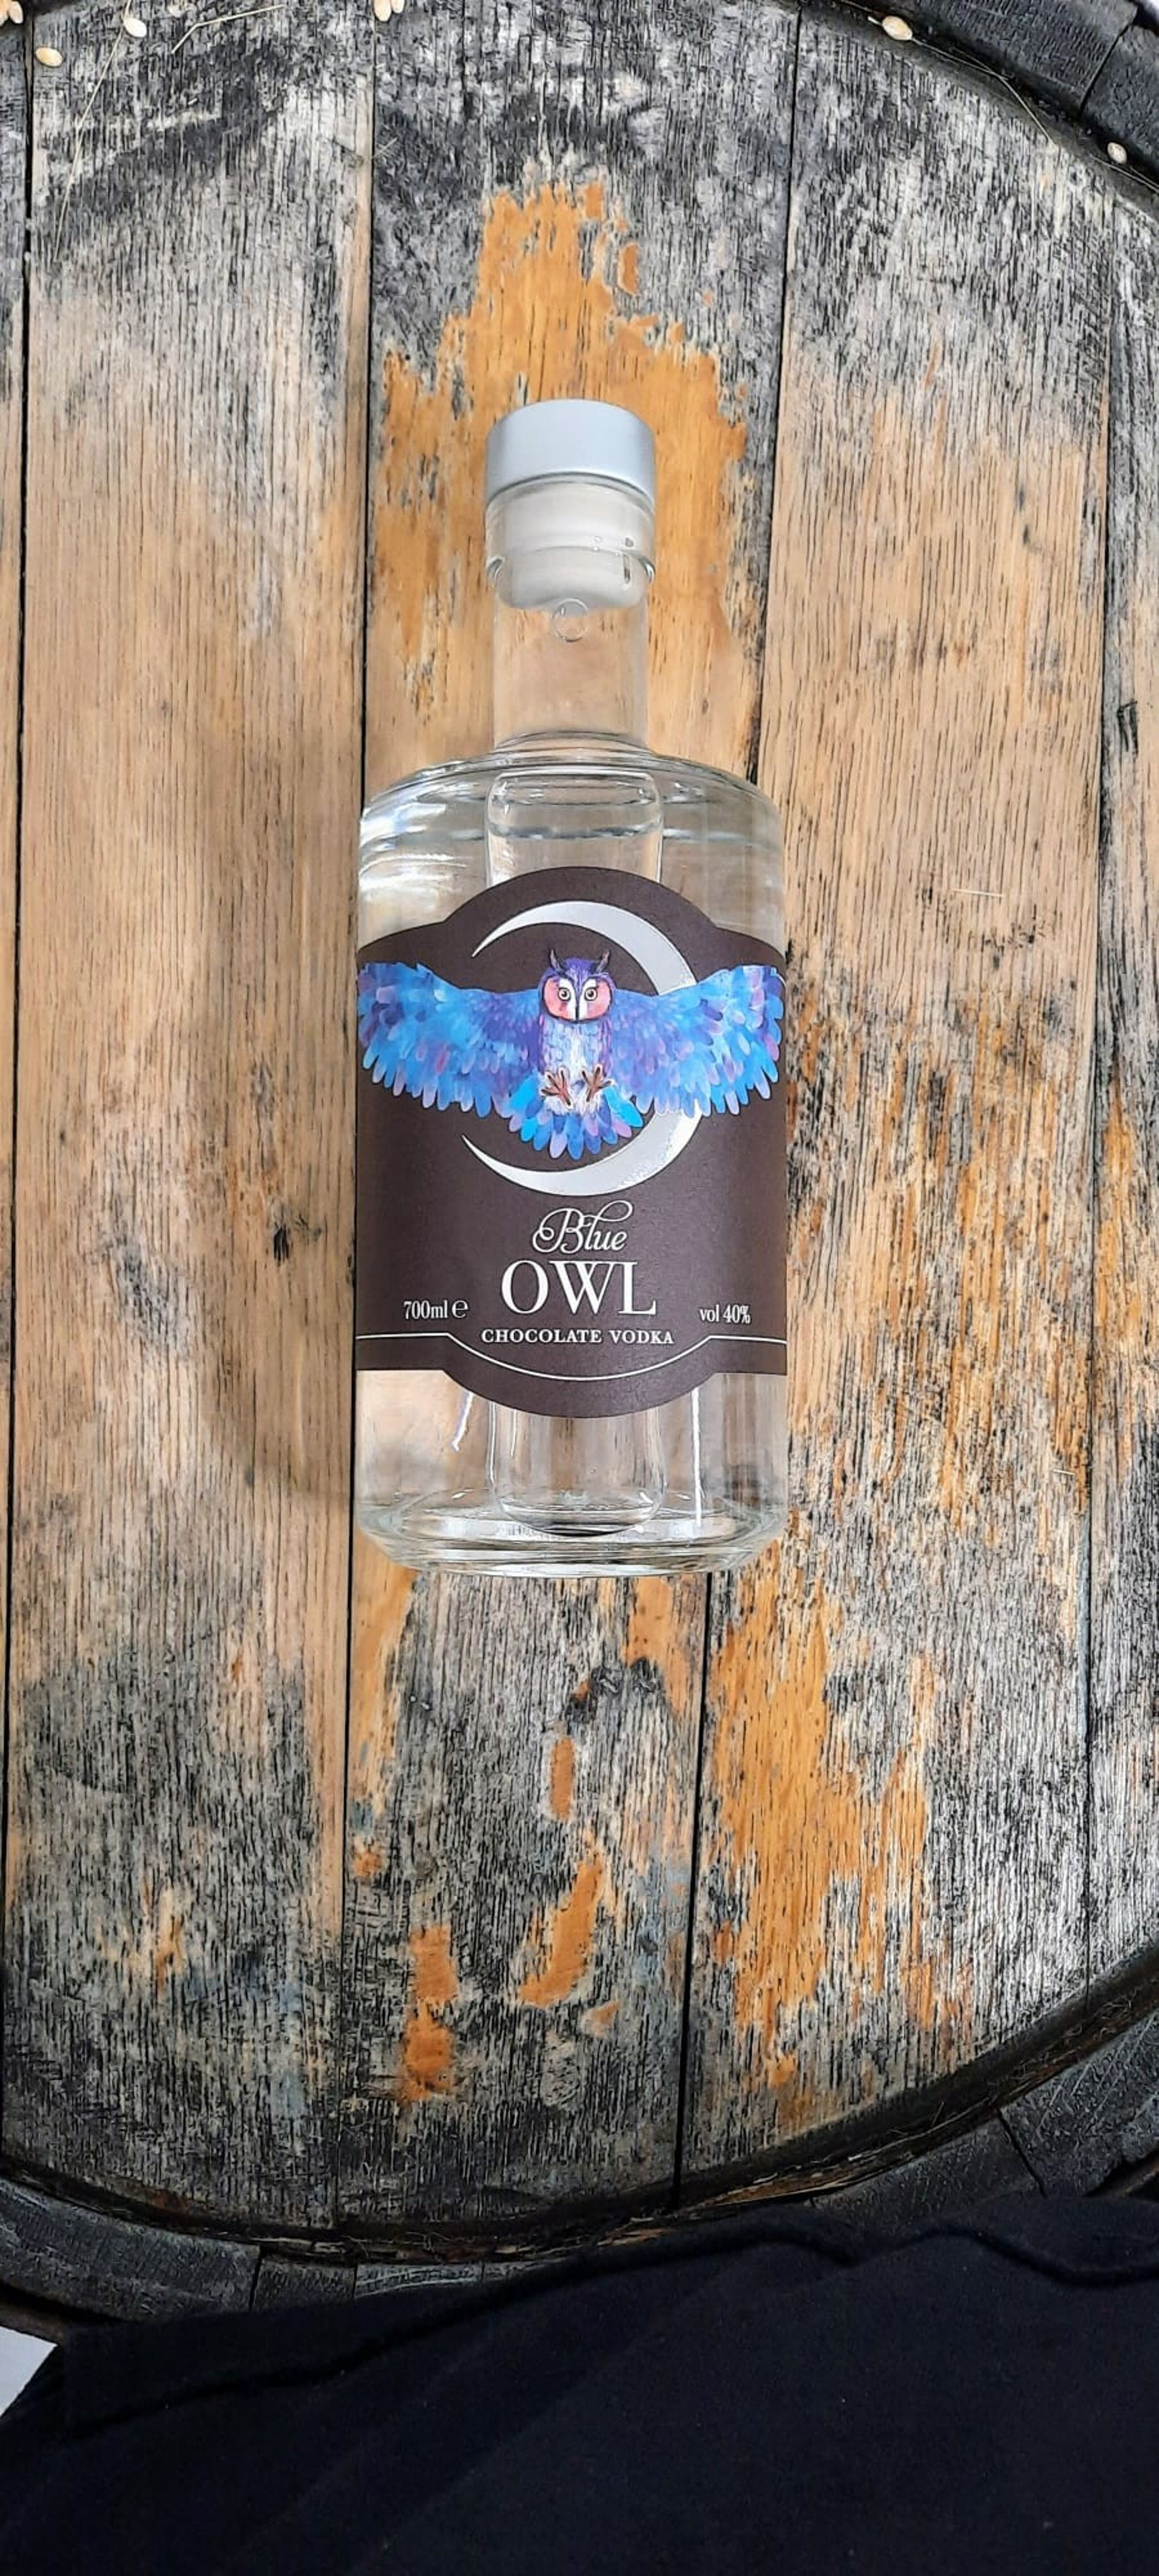 Vodka Buy Owl wholesale with Blue Chocolate